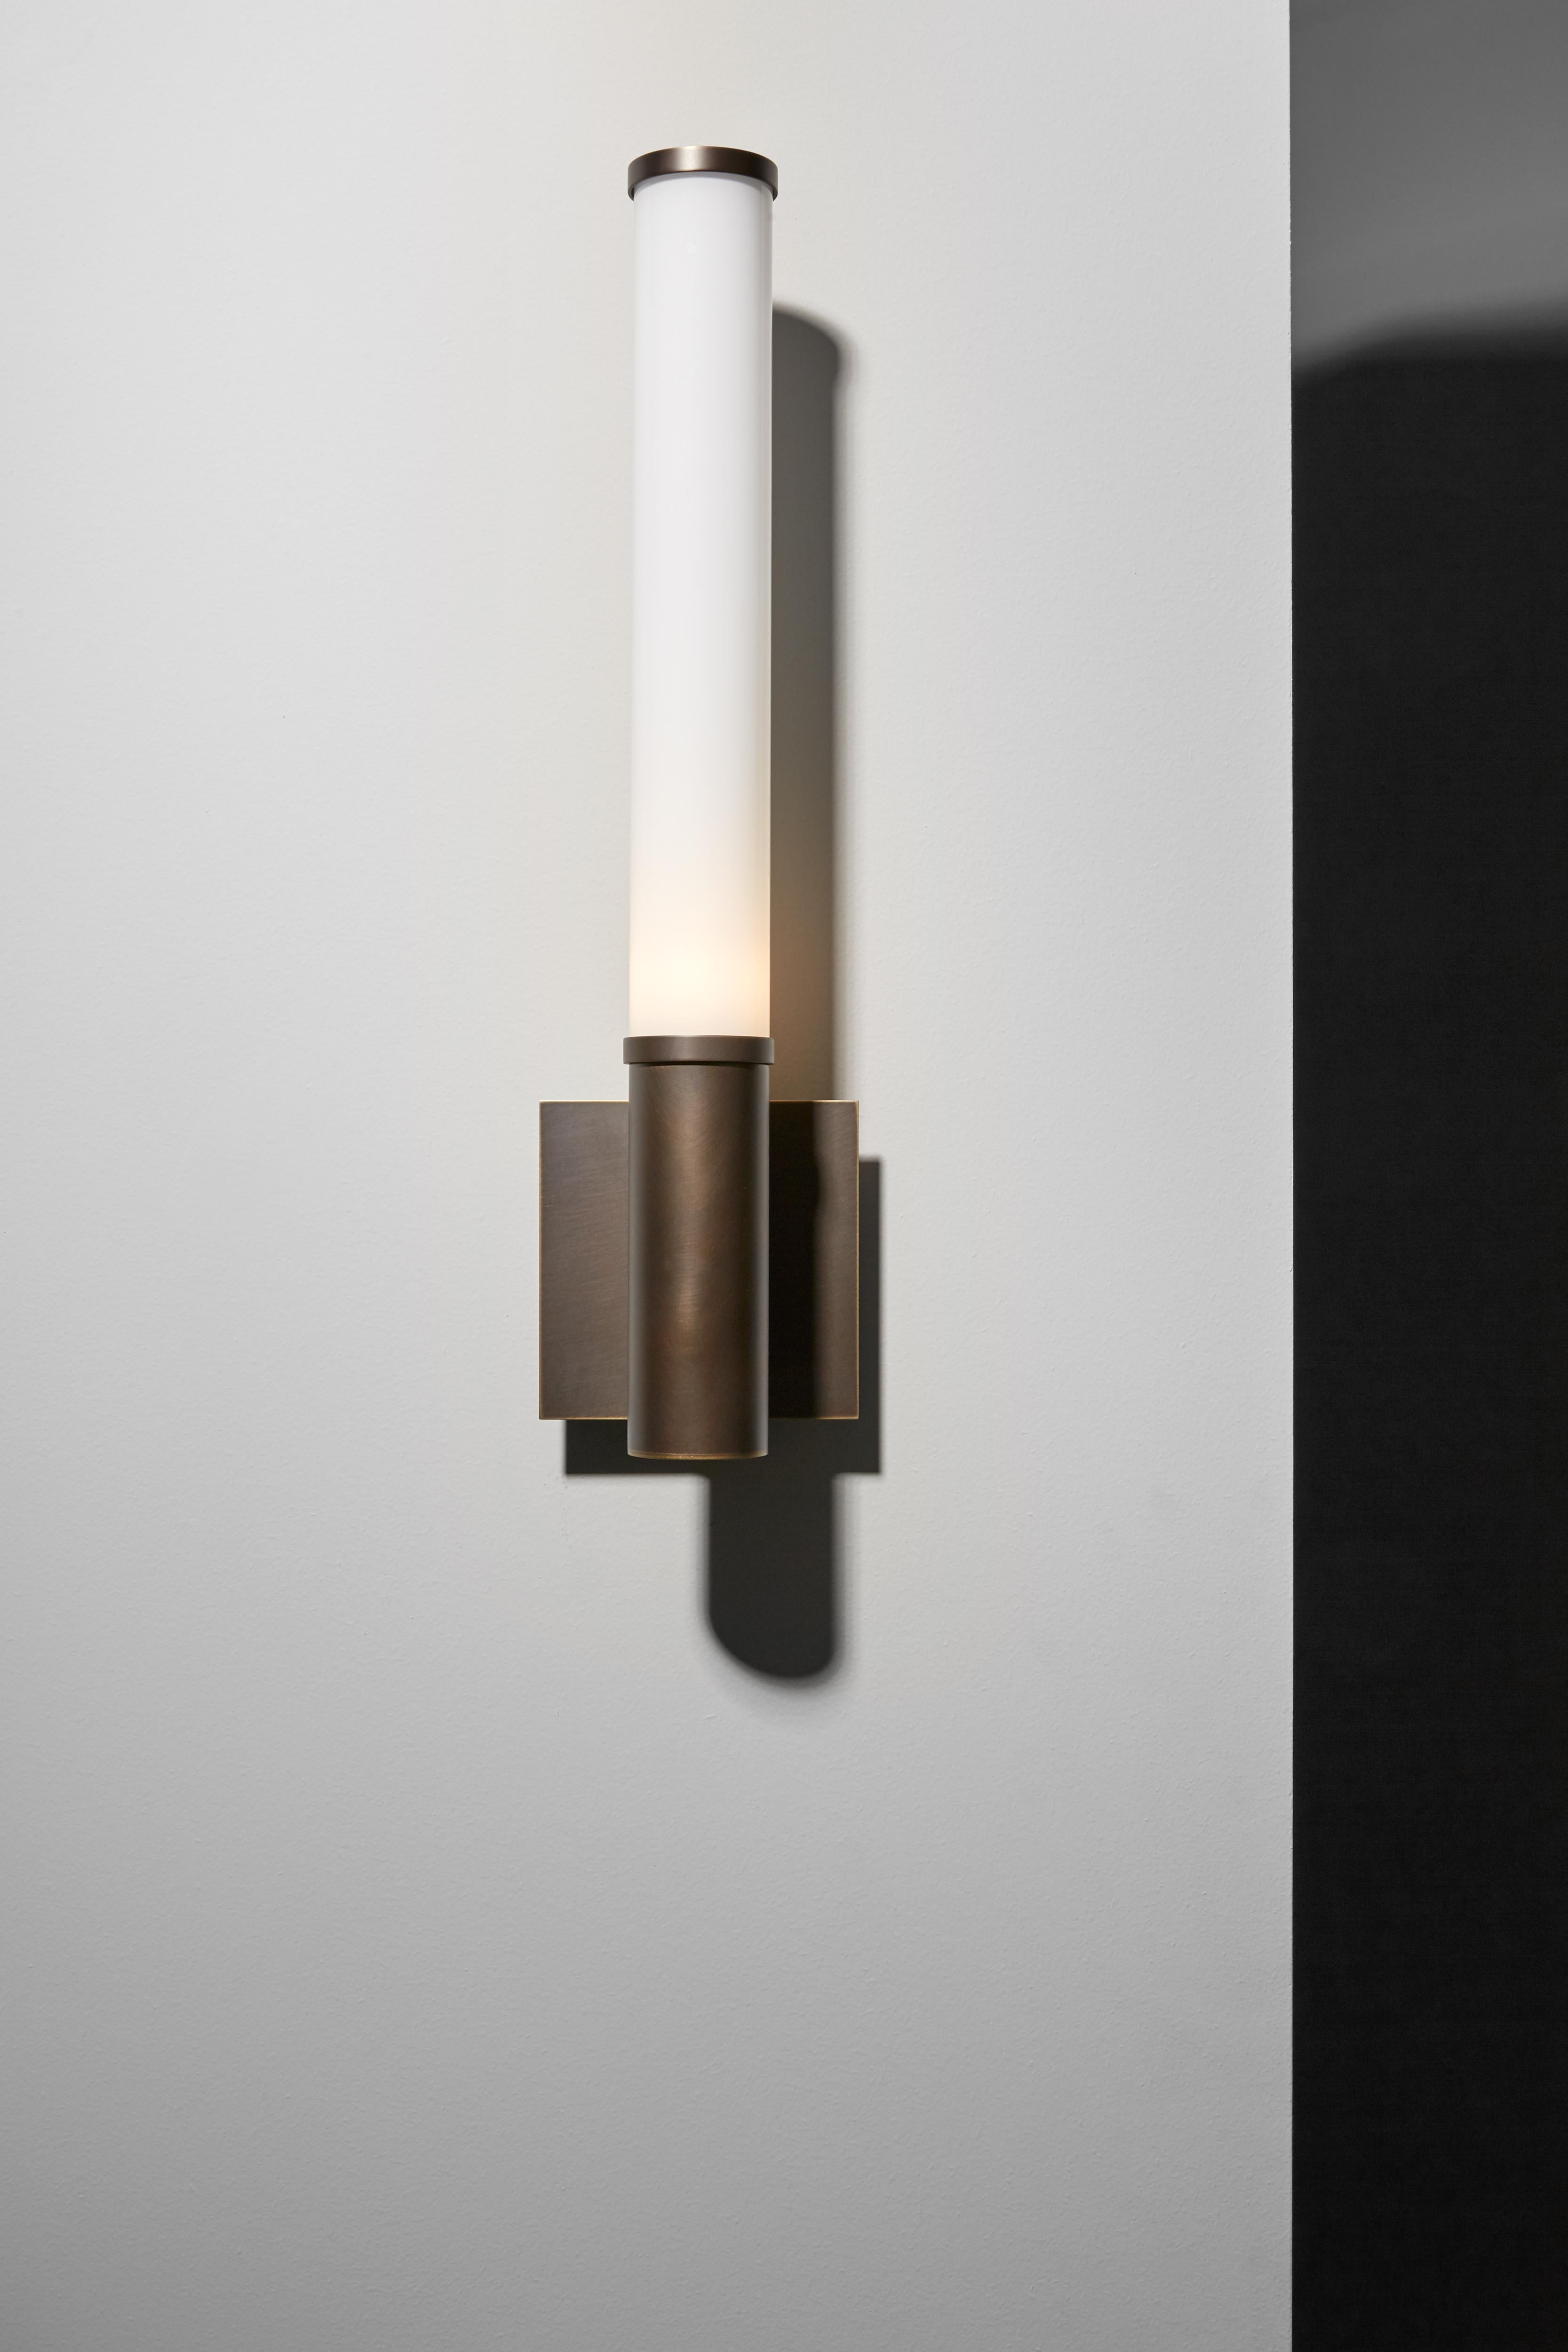 Wall lamp with diffused light. Dark burnished brass structure and white Murano blown glass diffuser.

Location: Interior
Light source: 1×5W G9 LED 350lm 2700°K
Voltage: 110 - 120 V / 220 - 240 V
Frequency: 50 - 60 Hz
Dimmable: Yes (bulbs